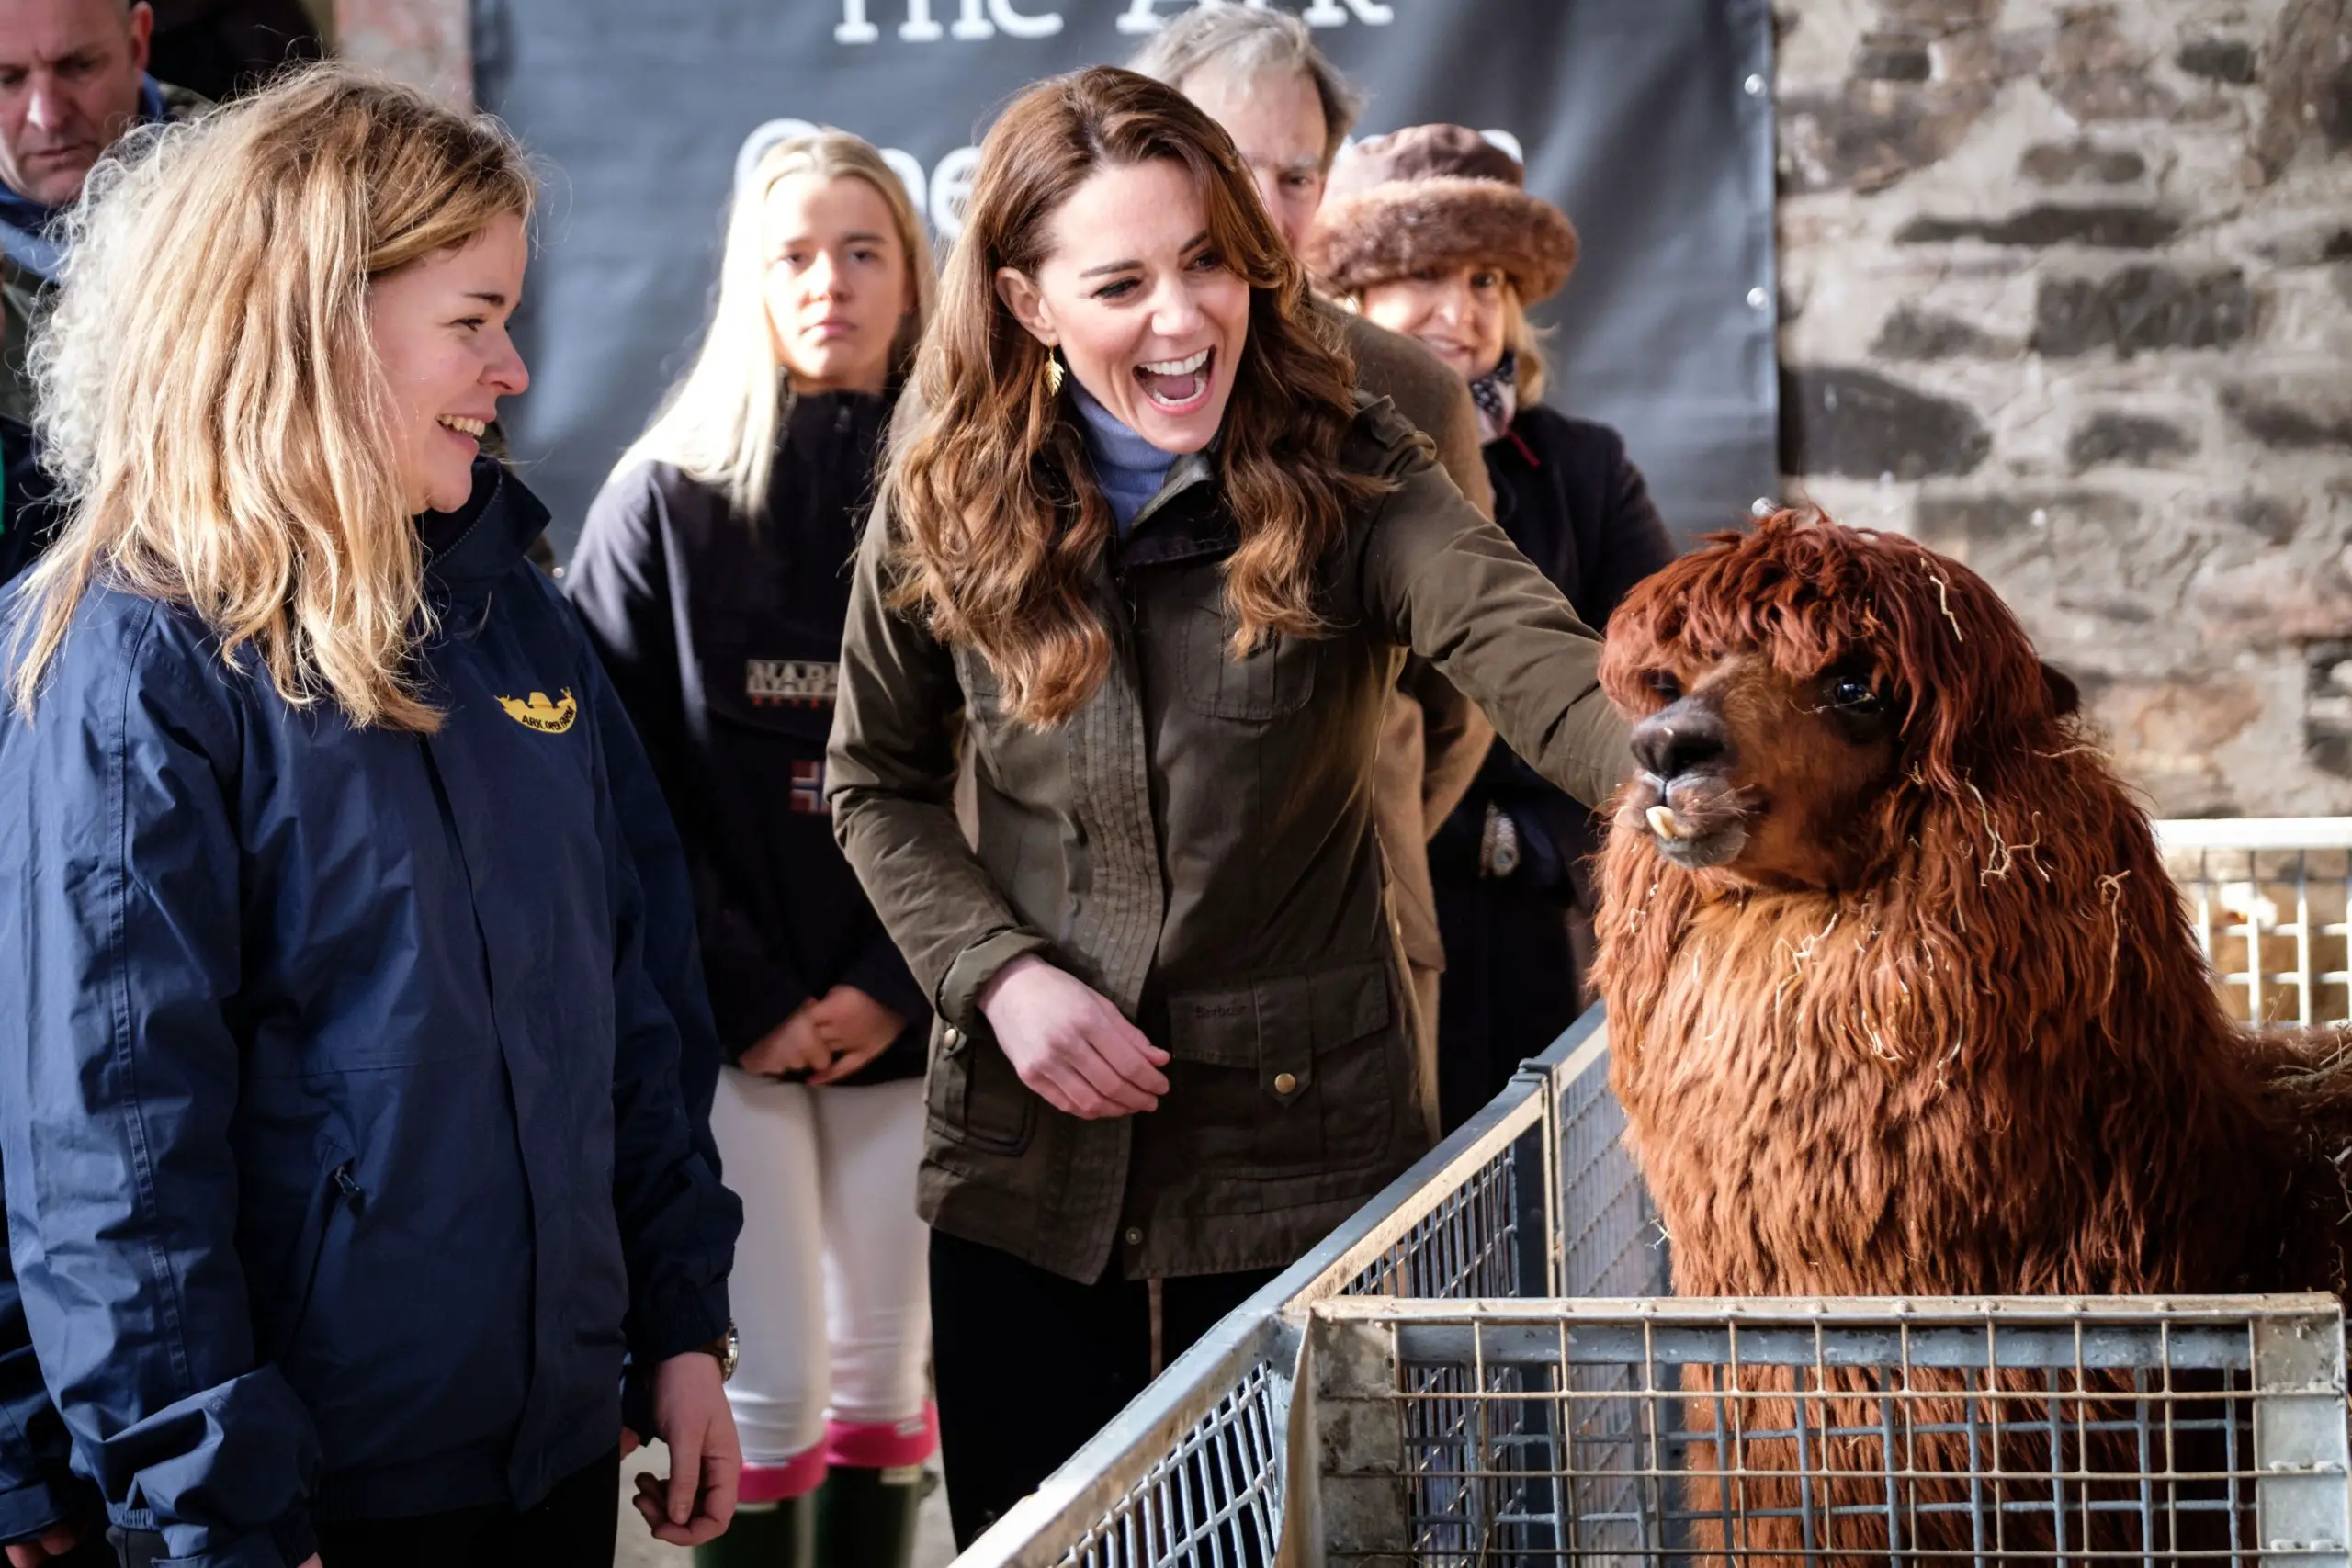 Duchess of Cambridge visited Northern Ireland to promote her 5 questions survey